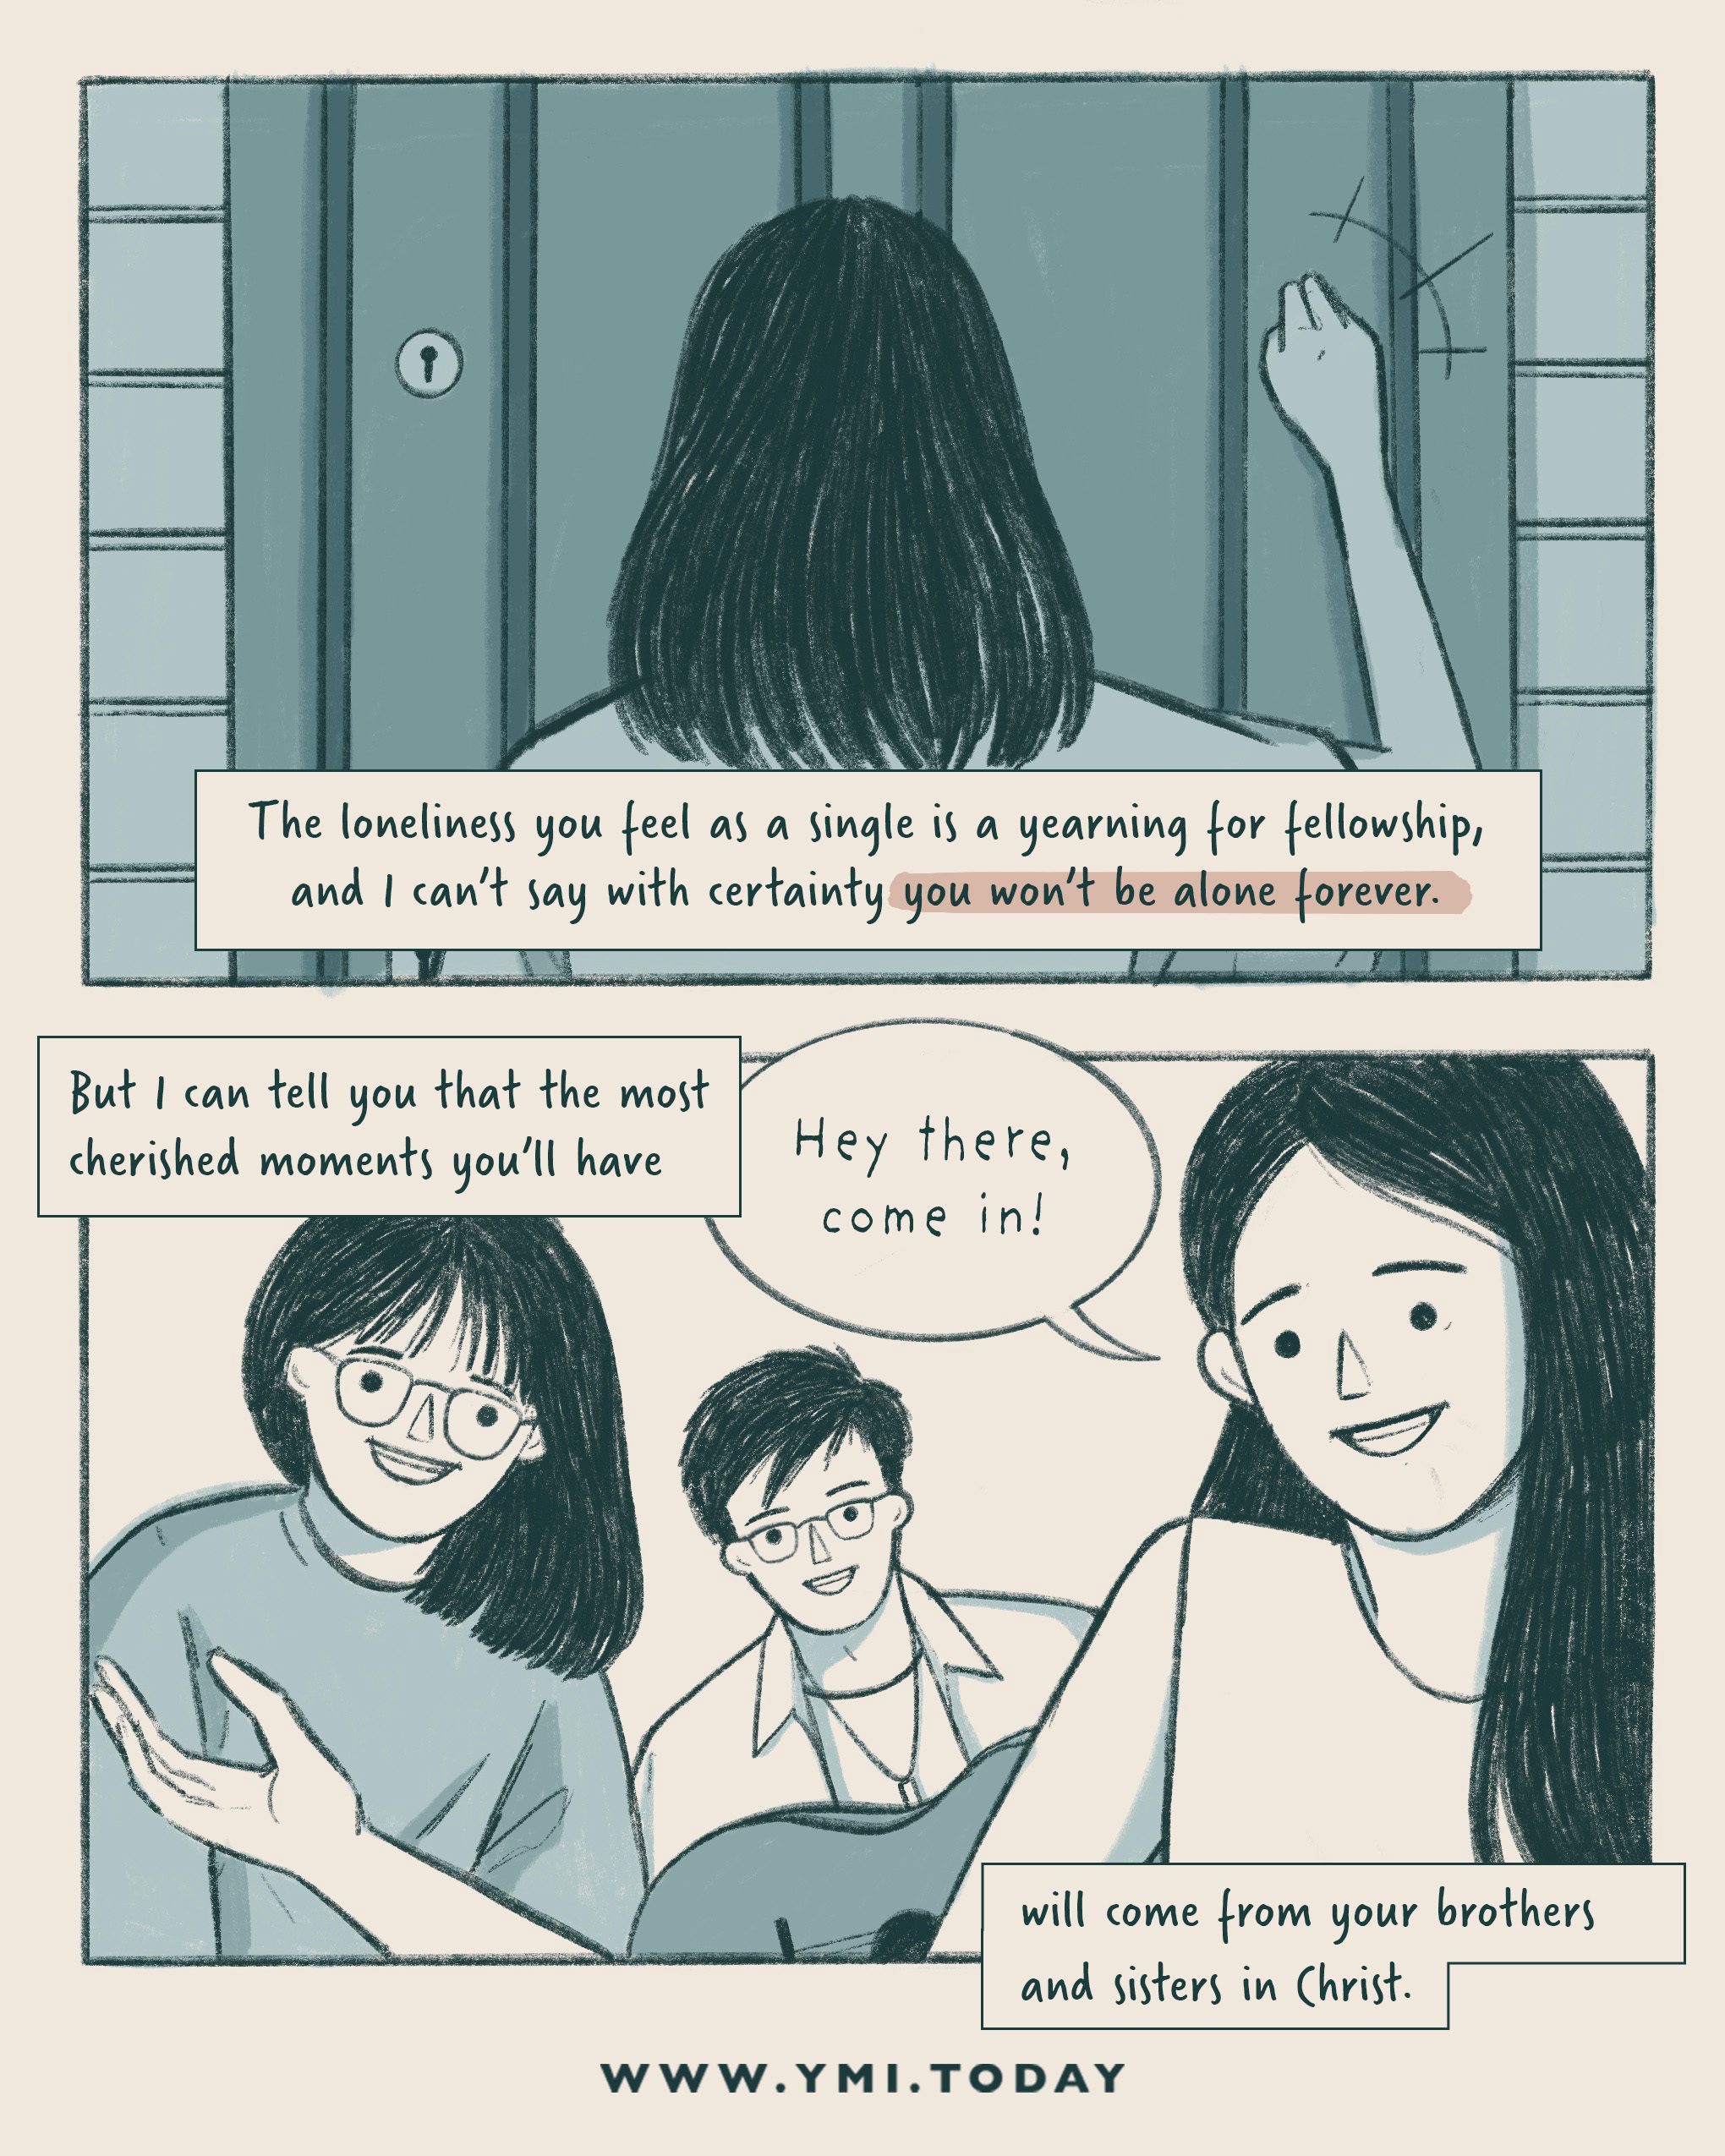 Girl knocks at someone house's door. Her friends welcome her warmly.